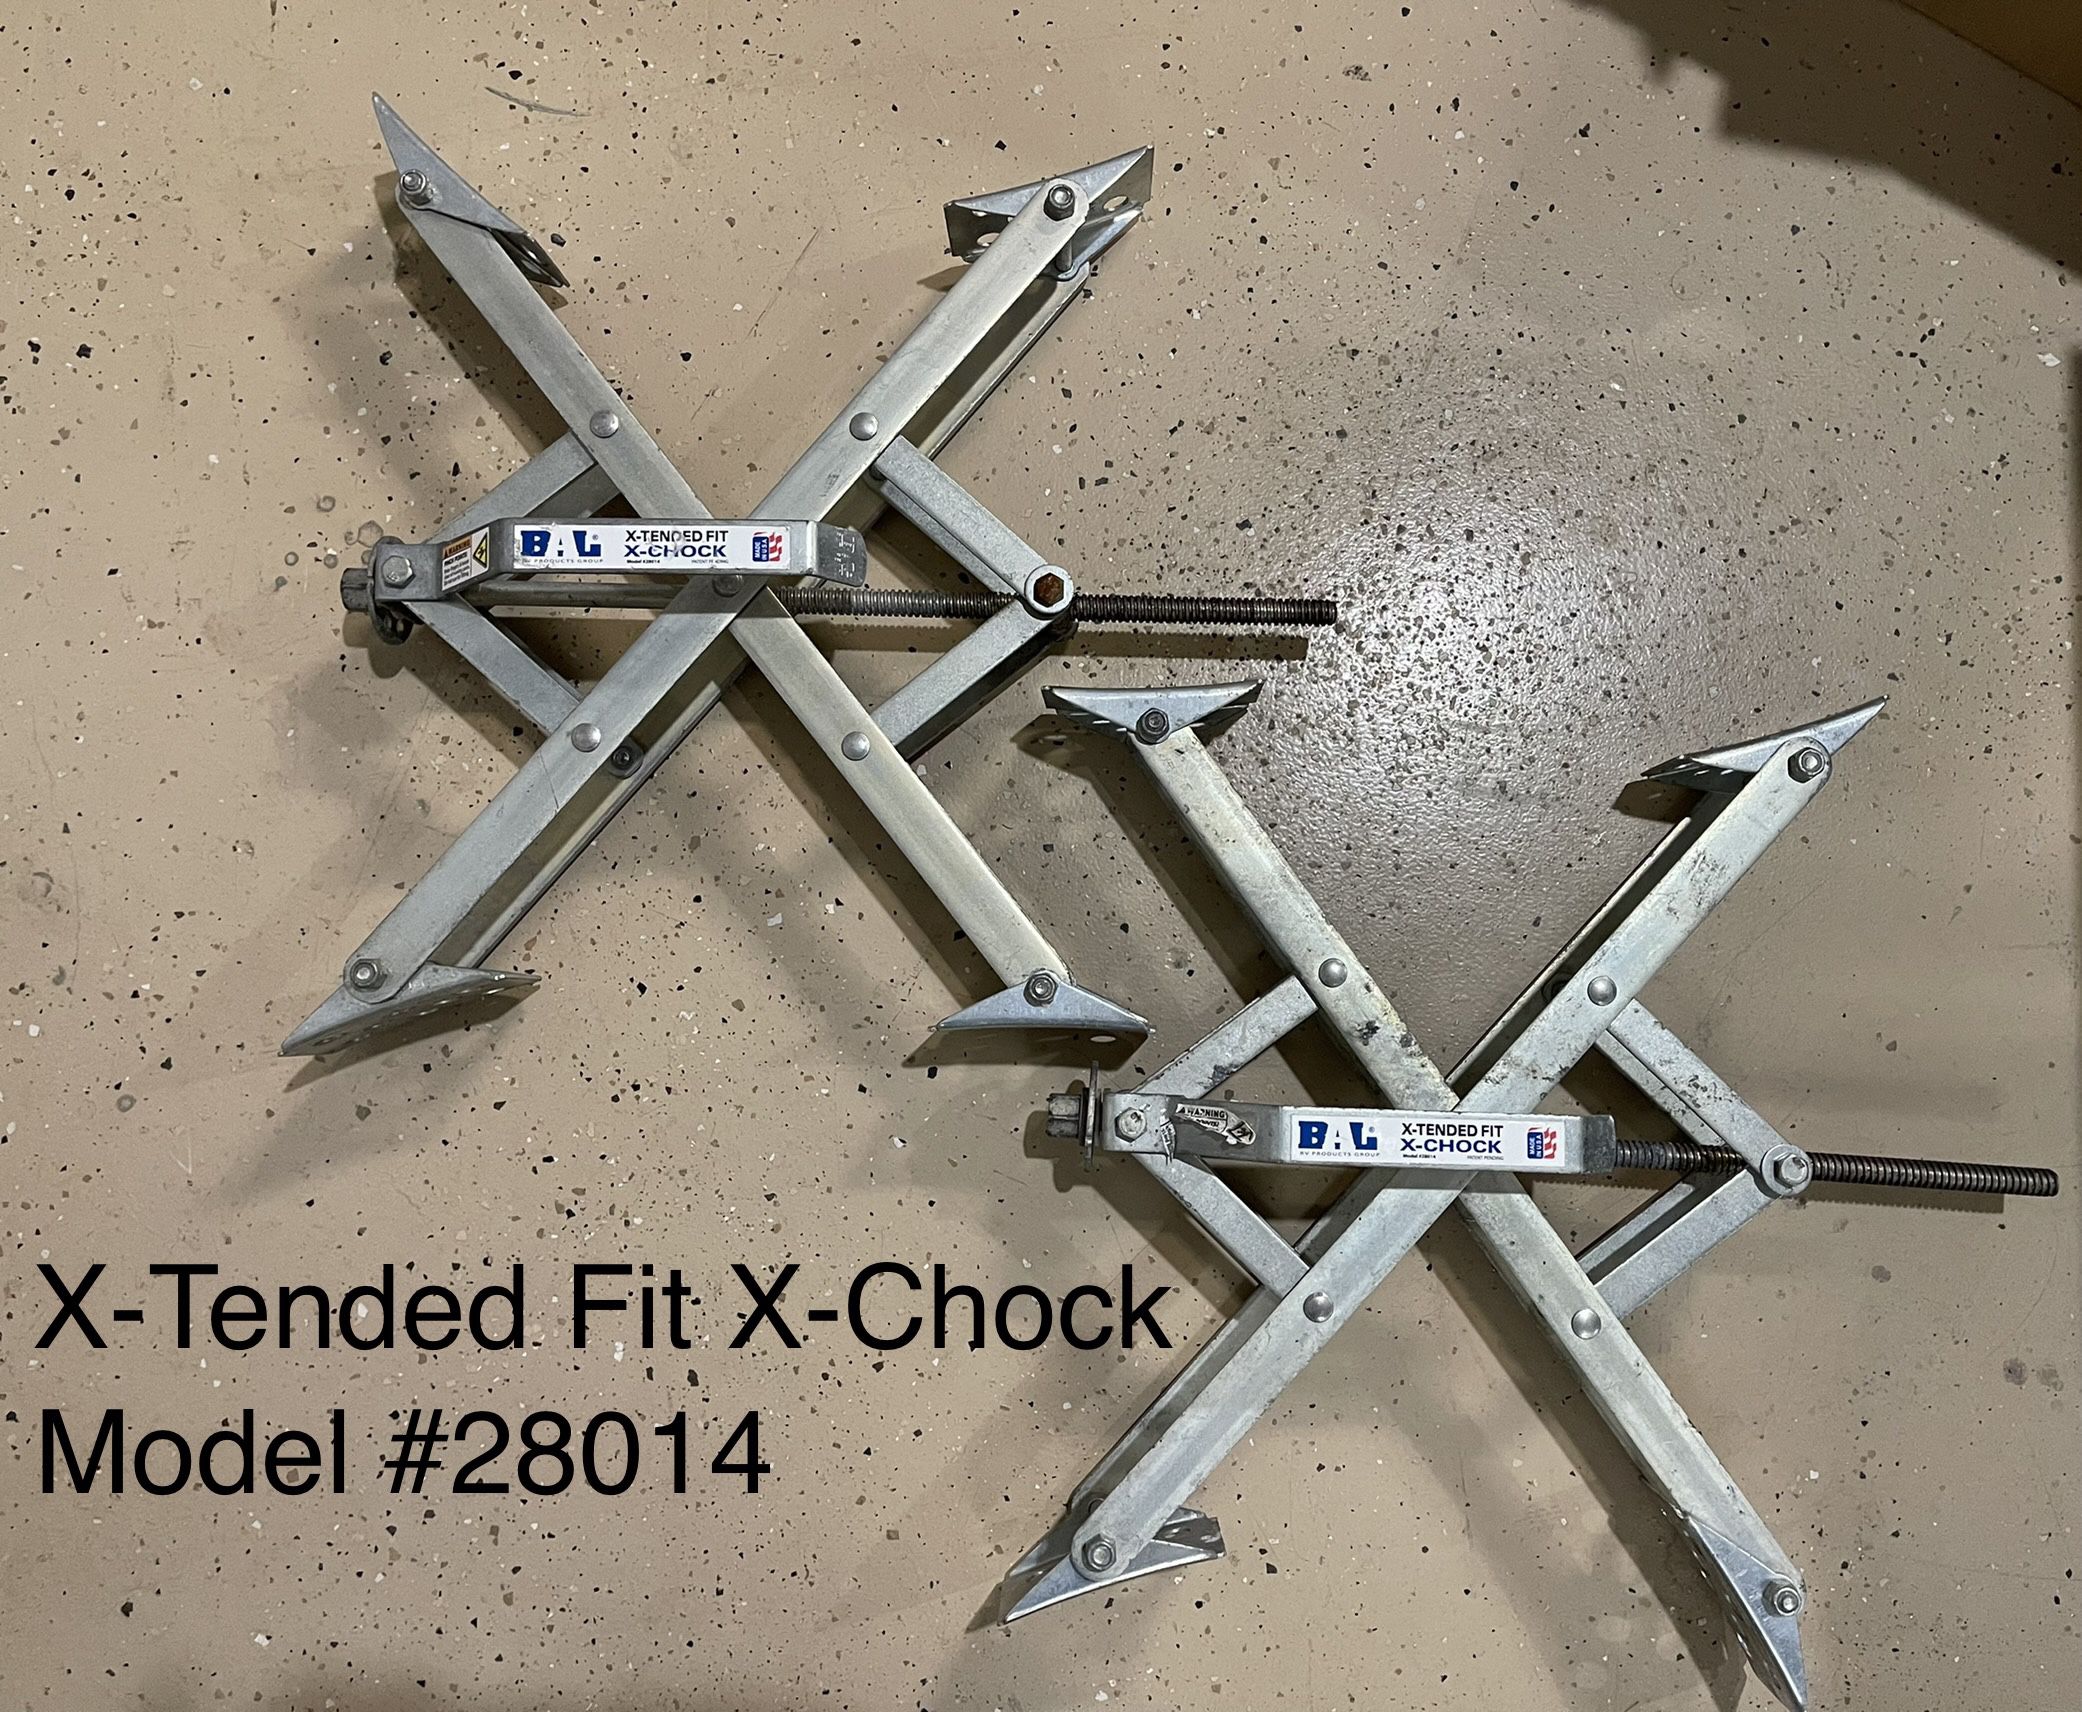 Trailer Tire Chocks - X-tended Fit X-chock 